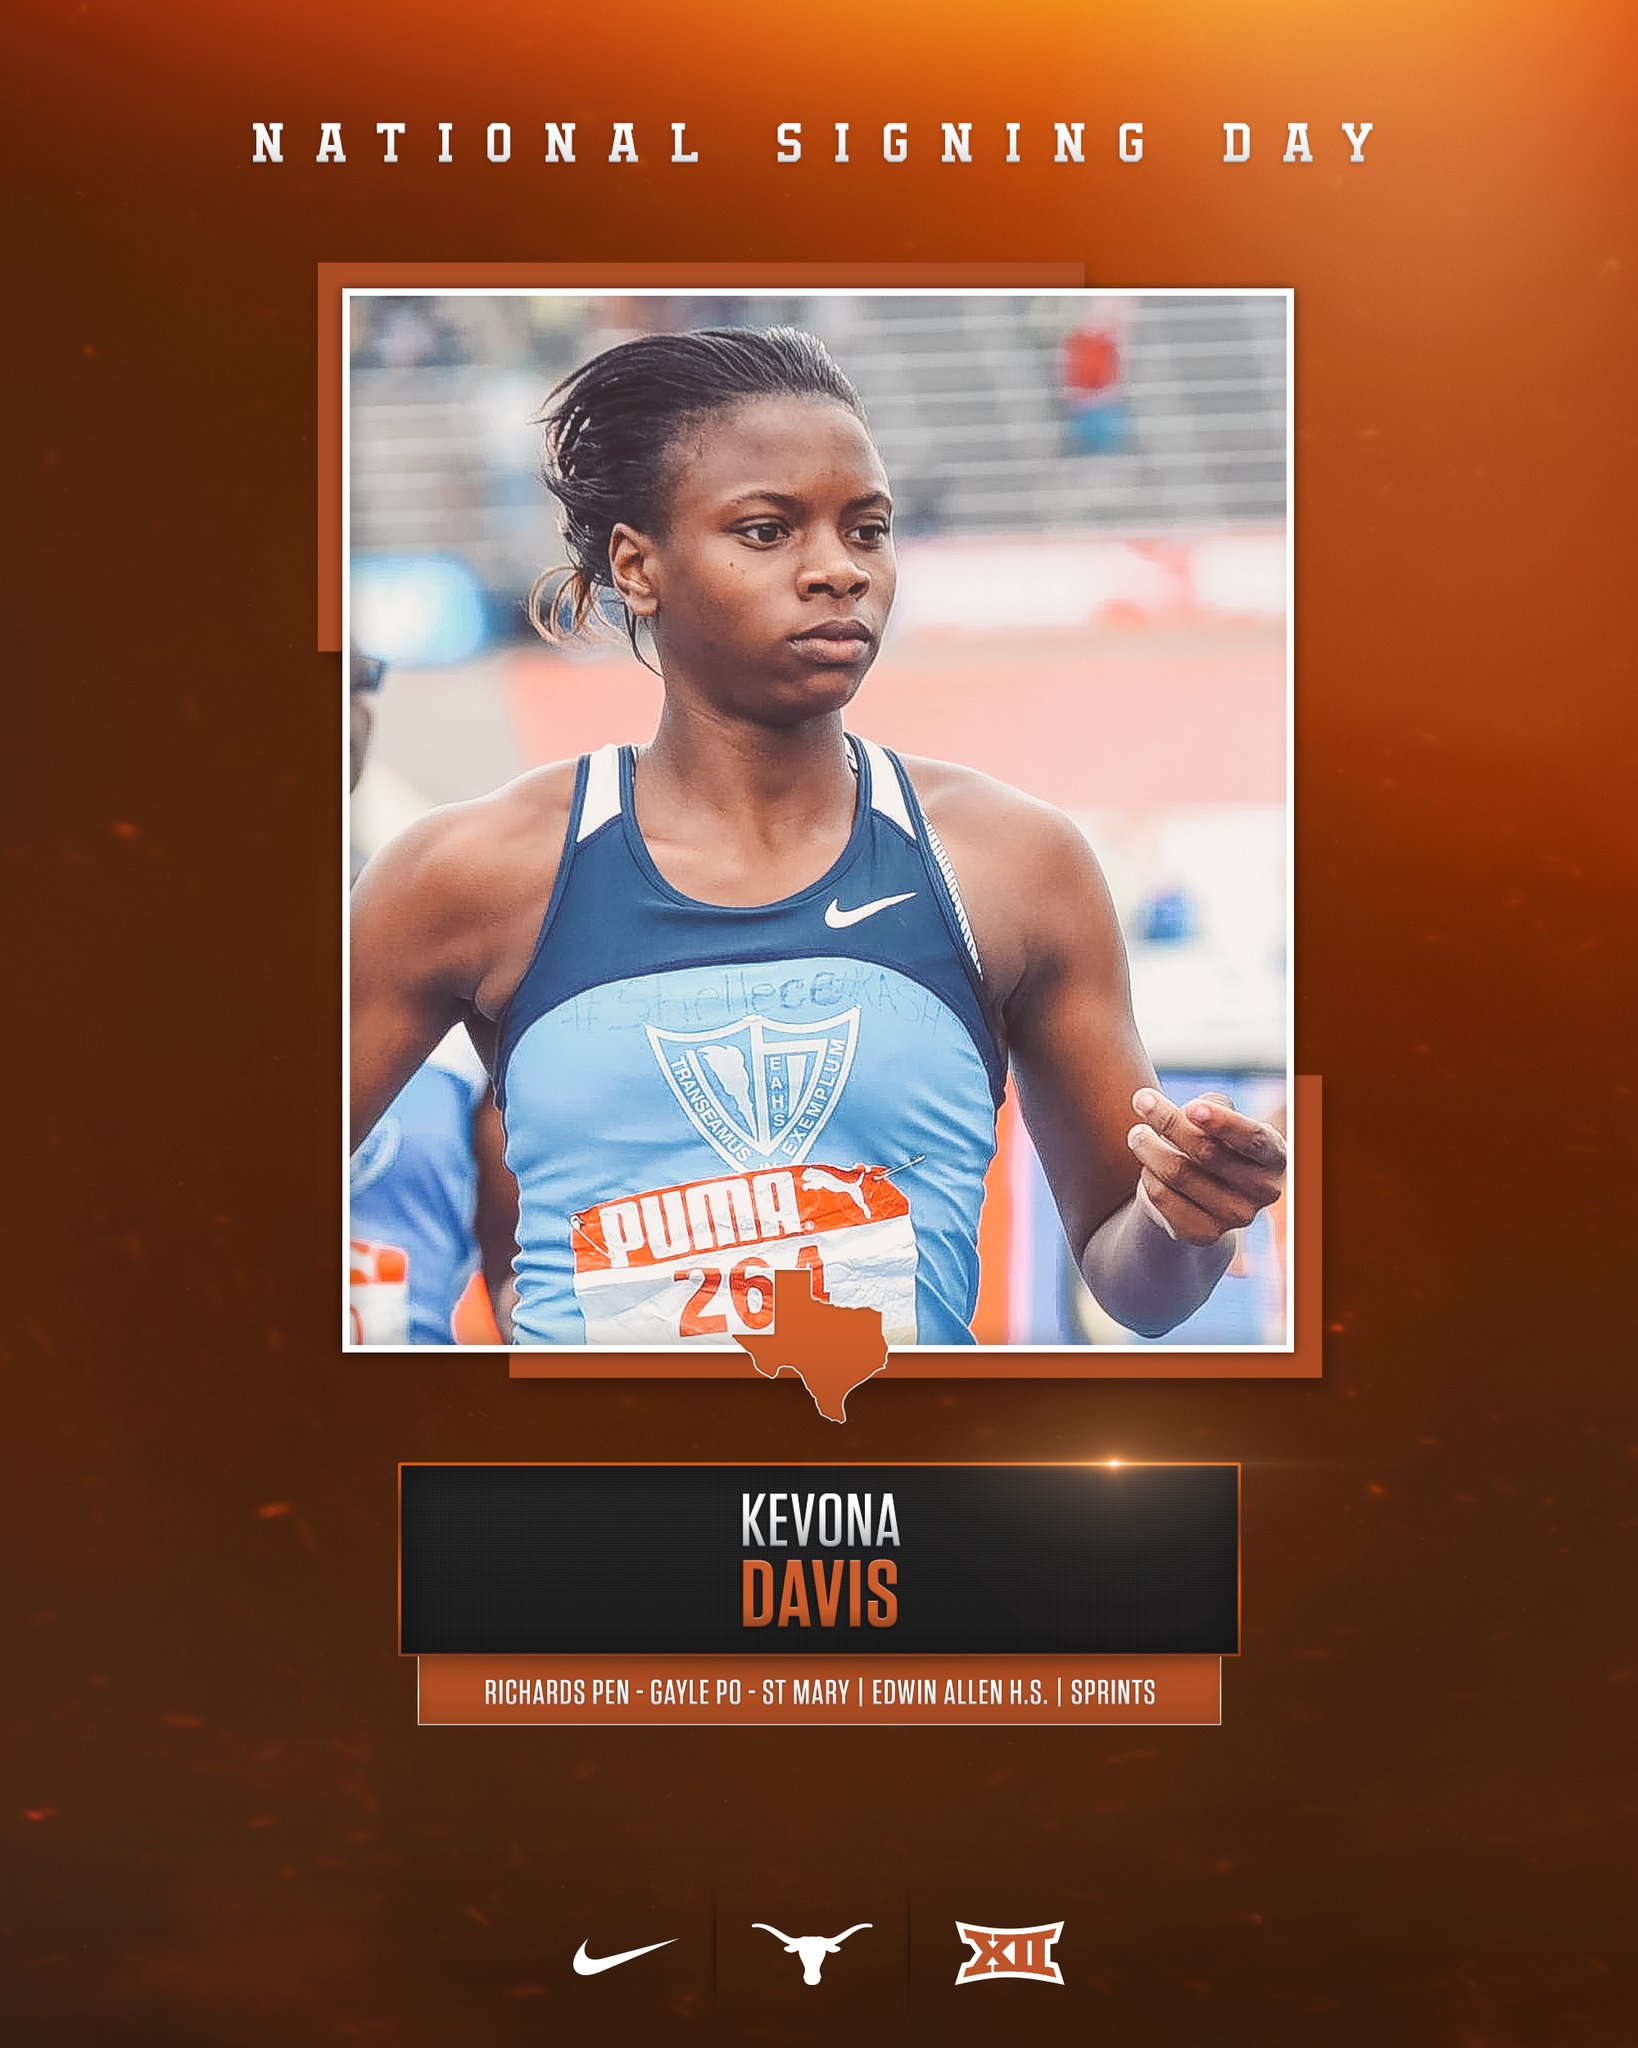 Kevona Davis finishes 2nd in 200m at US track meet